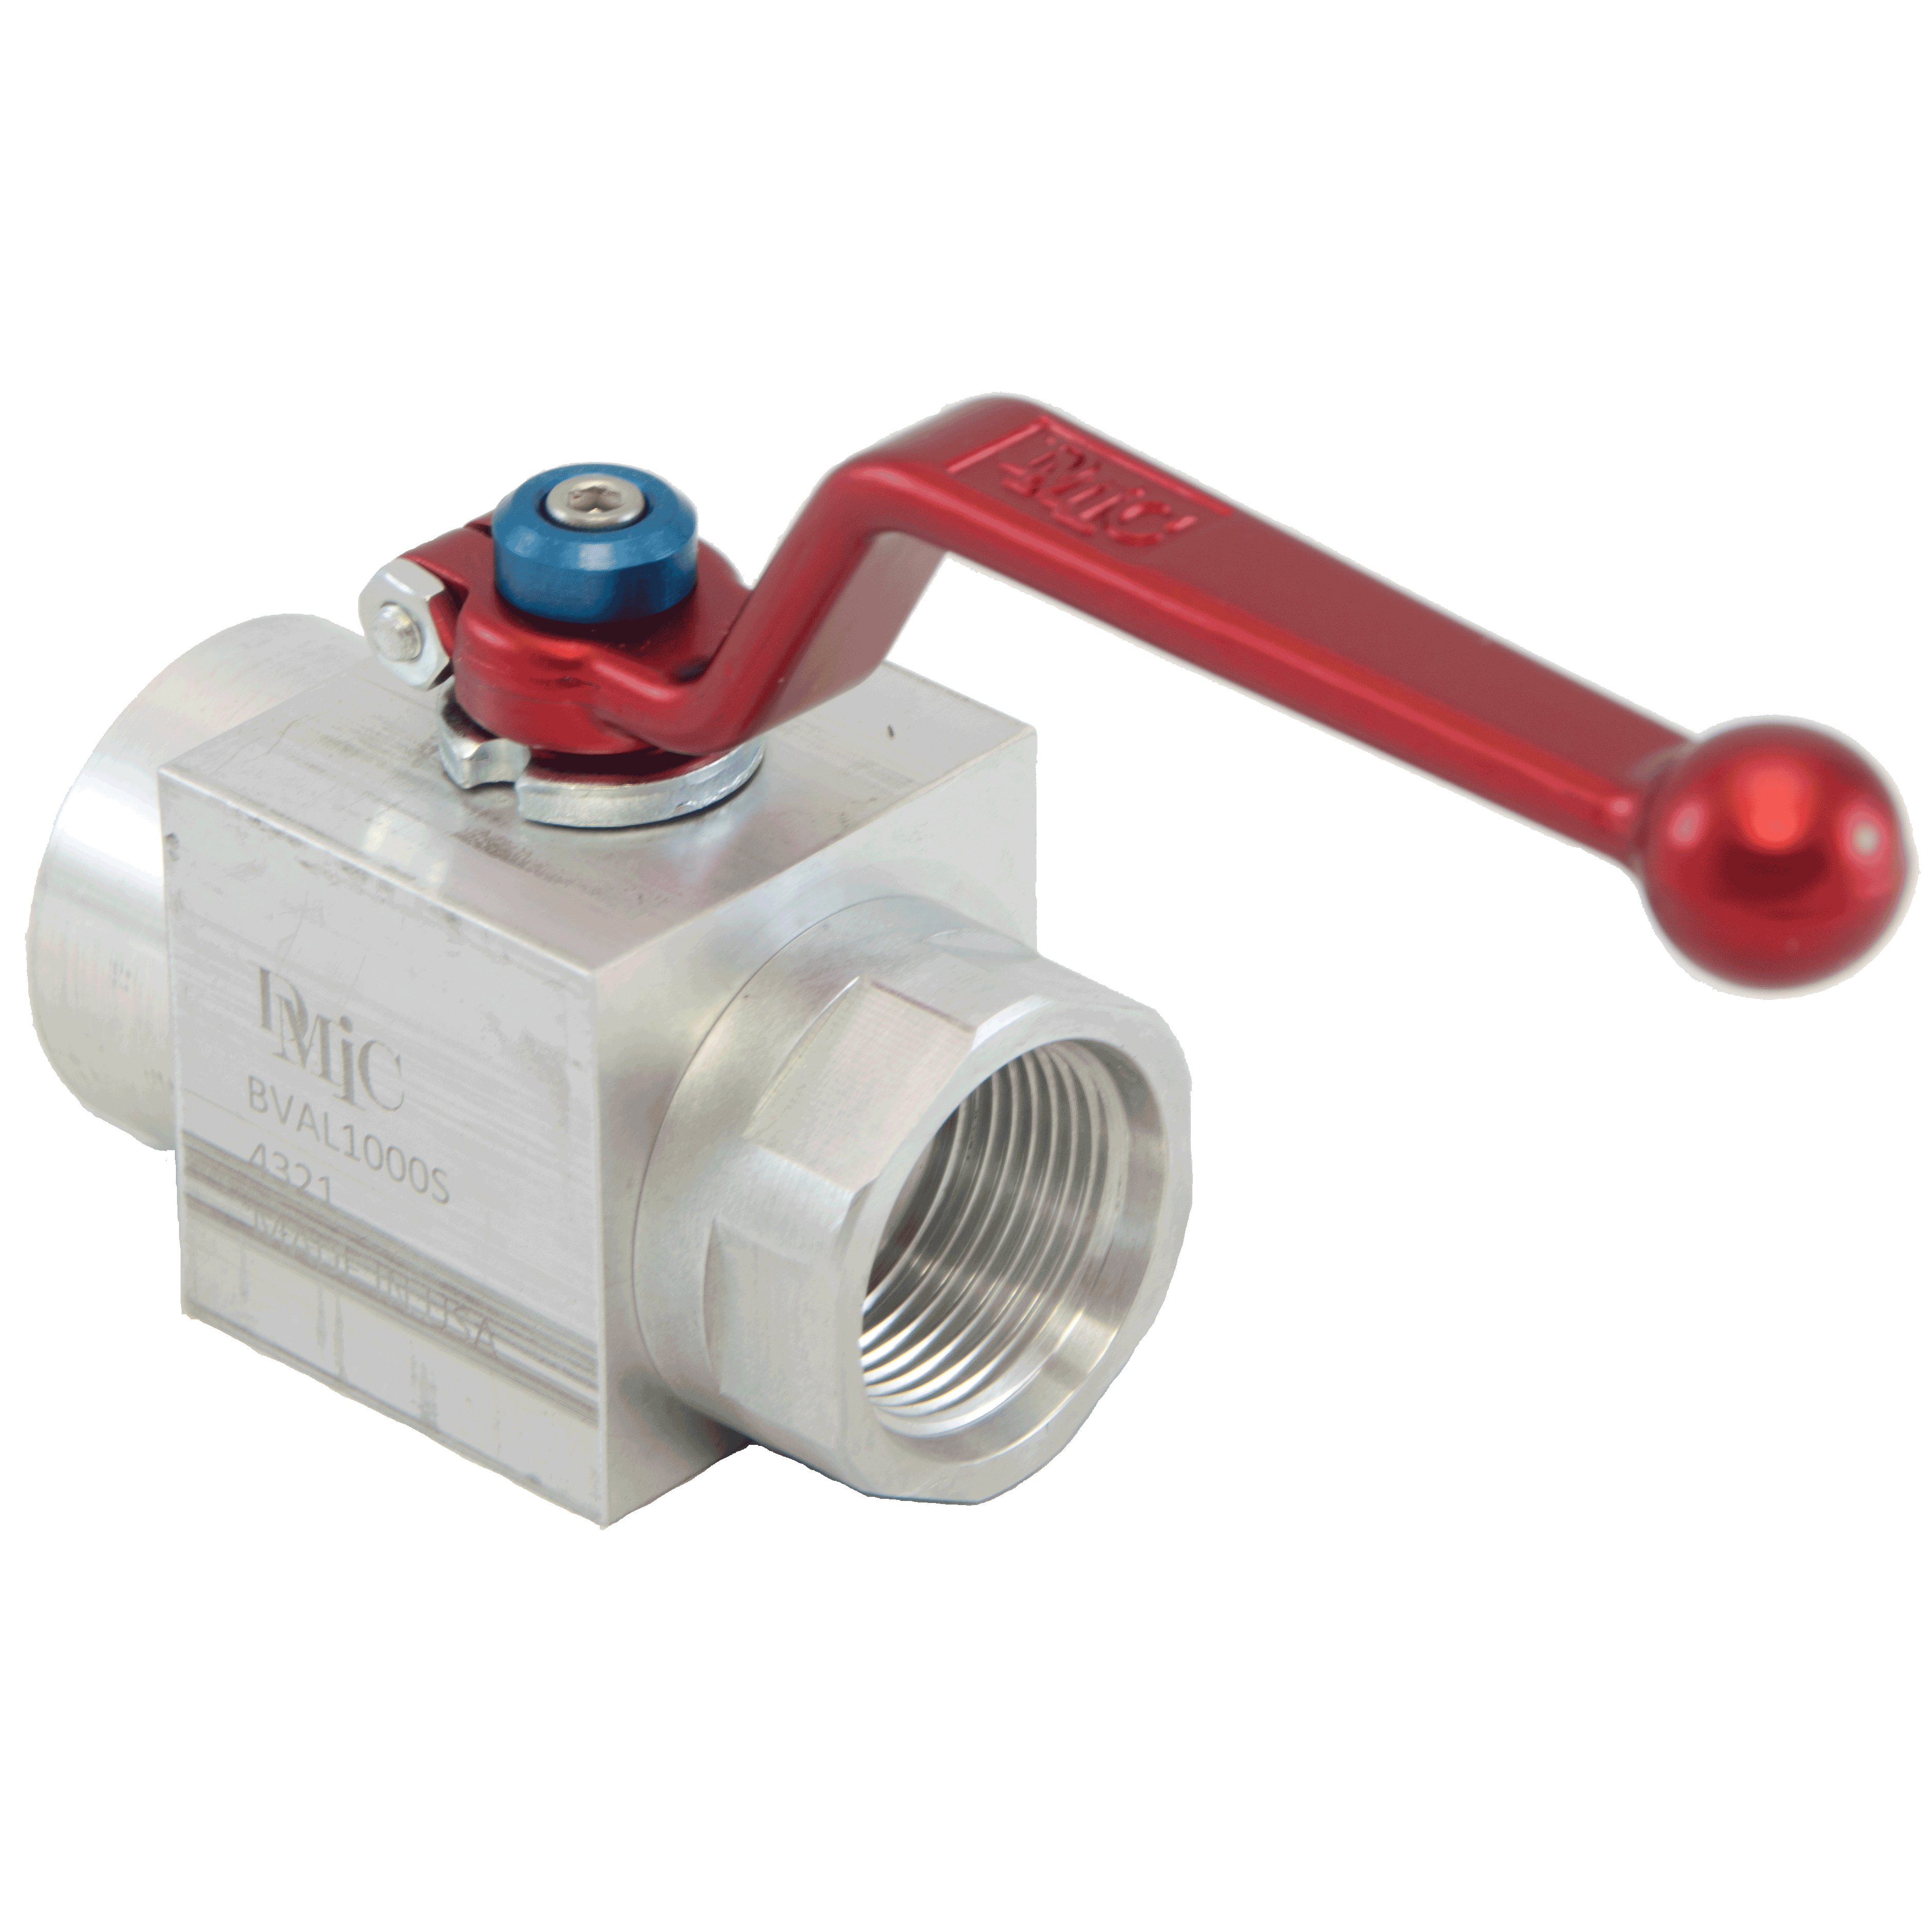 BVAL-1500N-4321 : DMIC Suction Ball Valve, 1.5 NPT, Aluminum, 600psi, Two-Way